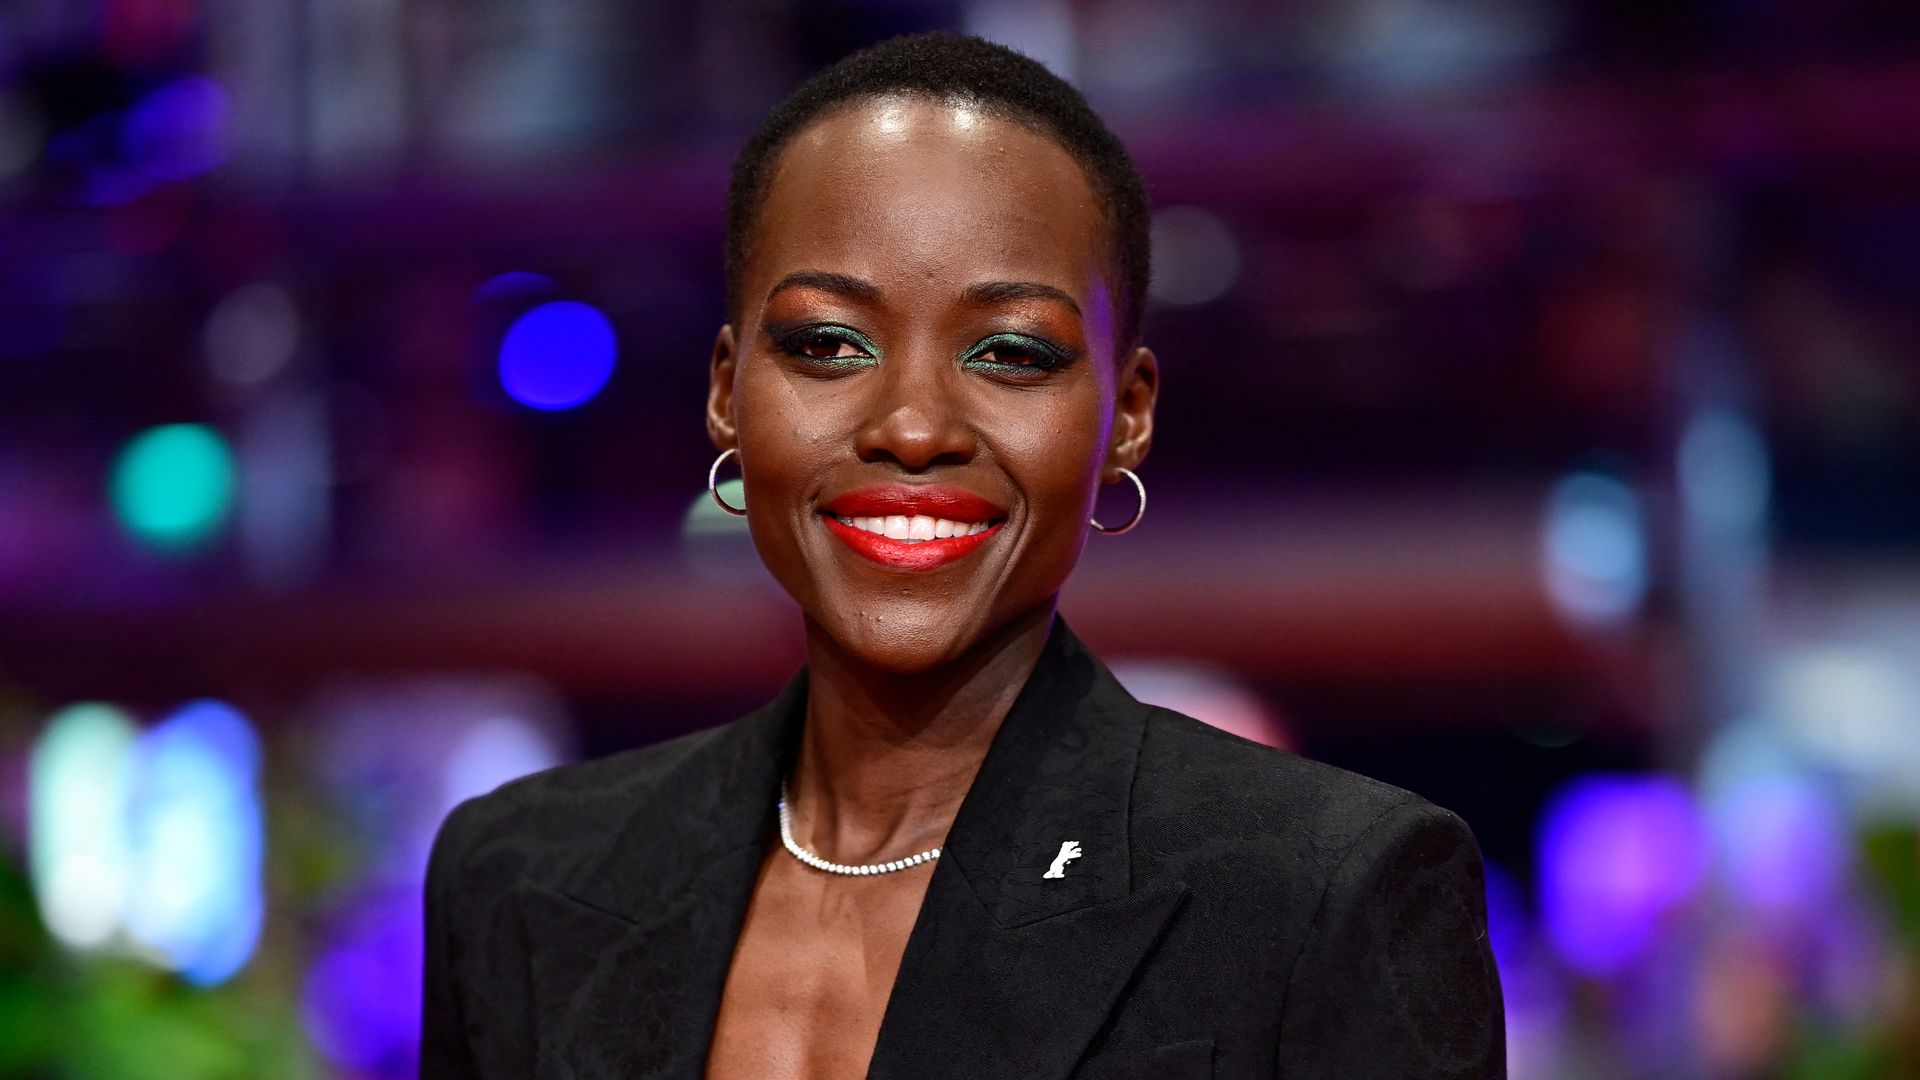 Lupita Nyong'o speaks out about very public heartbreak and apparent new Joshua Jackson romance